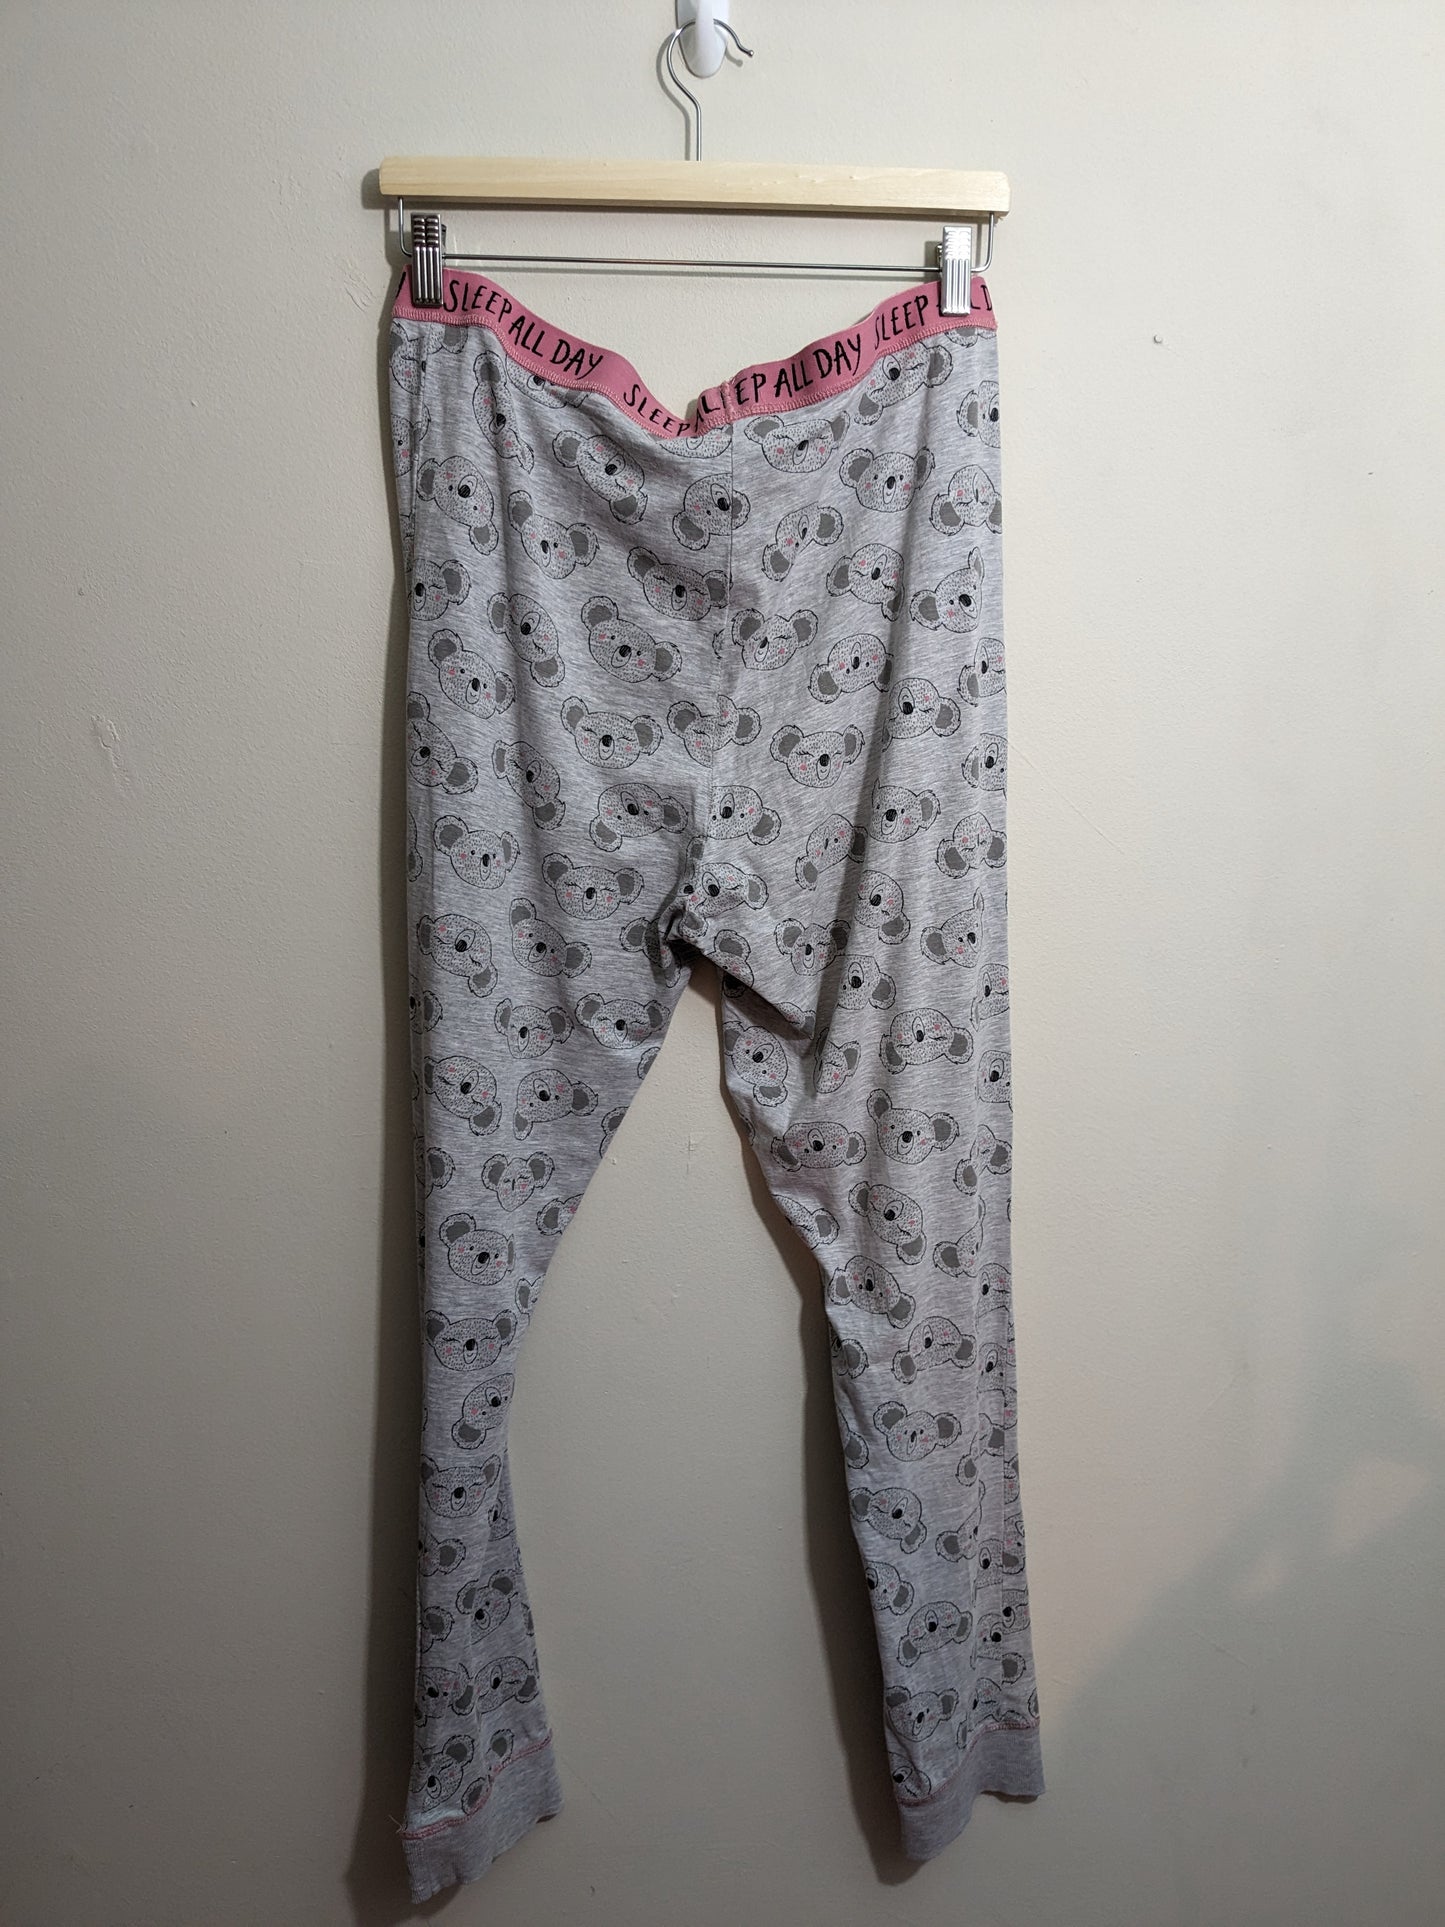 Size 16-18 Reworked Pyjama Set - Embroidered D. H. Lawrence Literary Sleep Quote - Star Illustrations